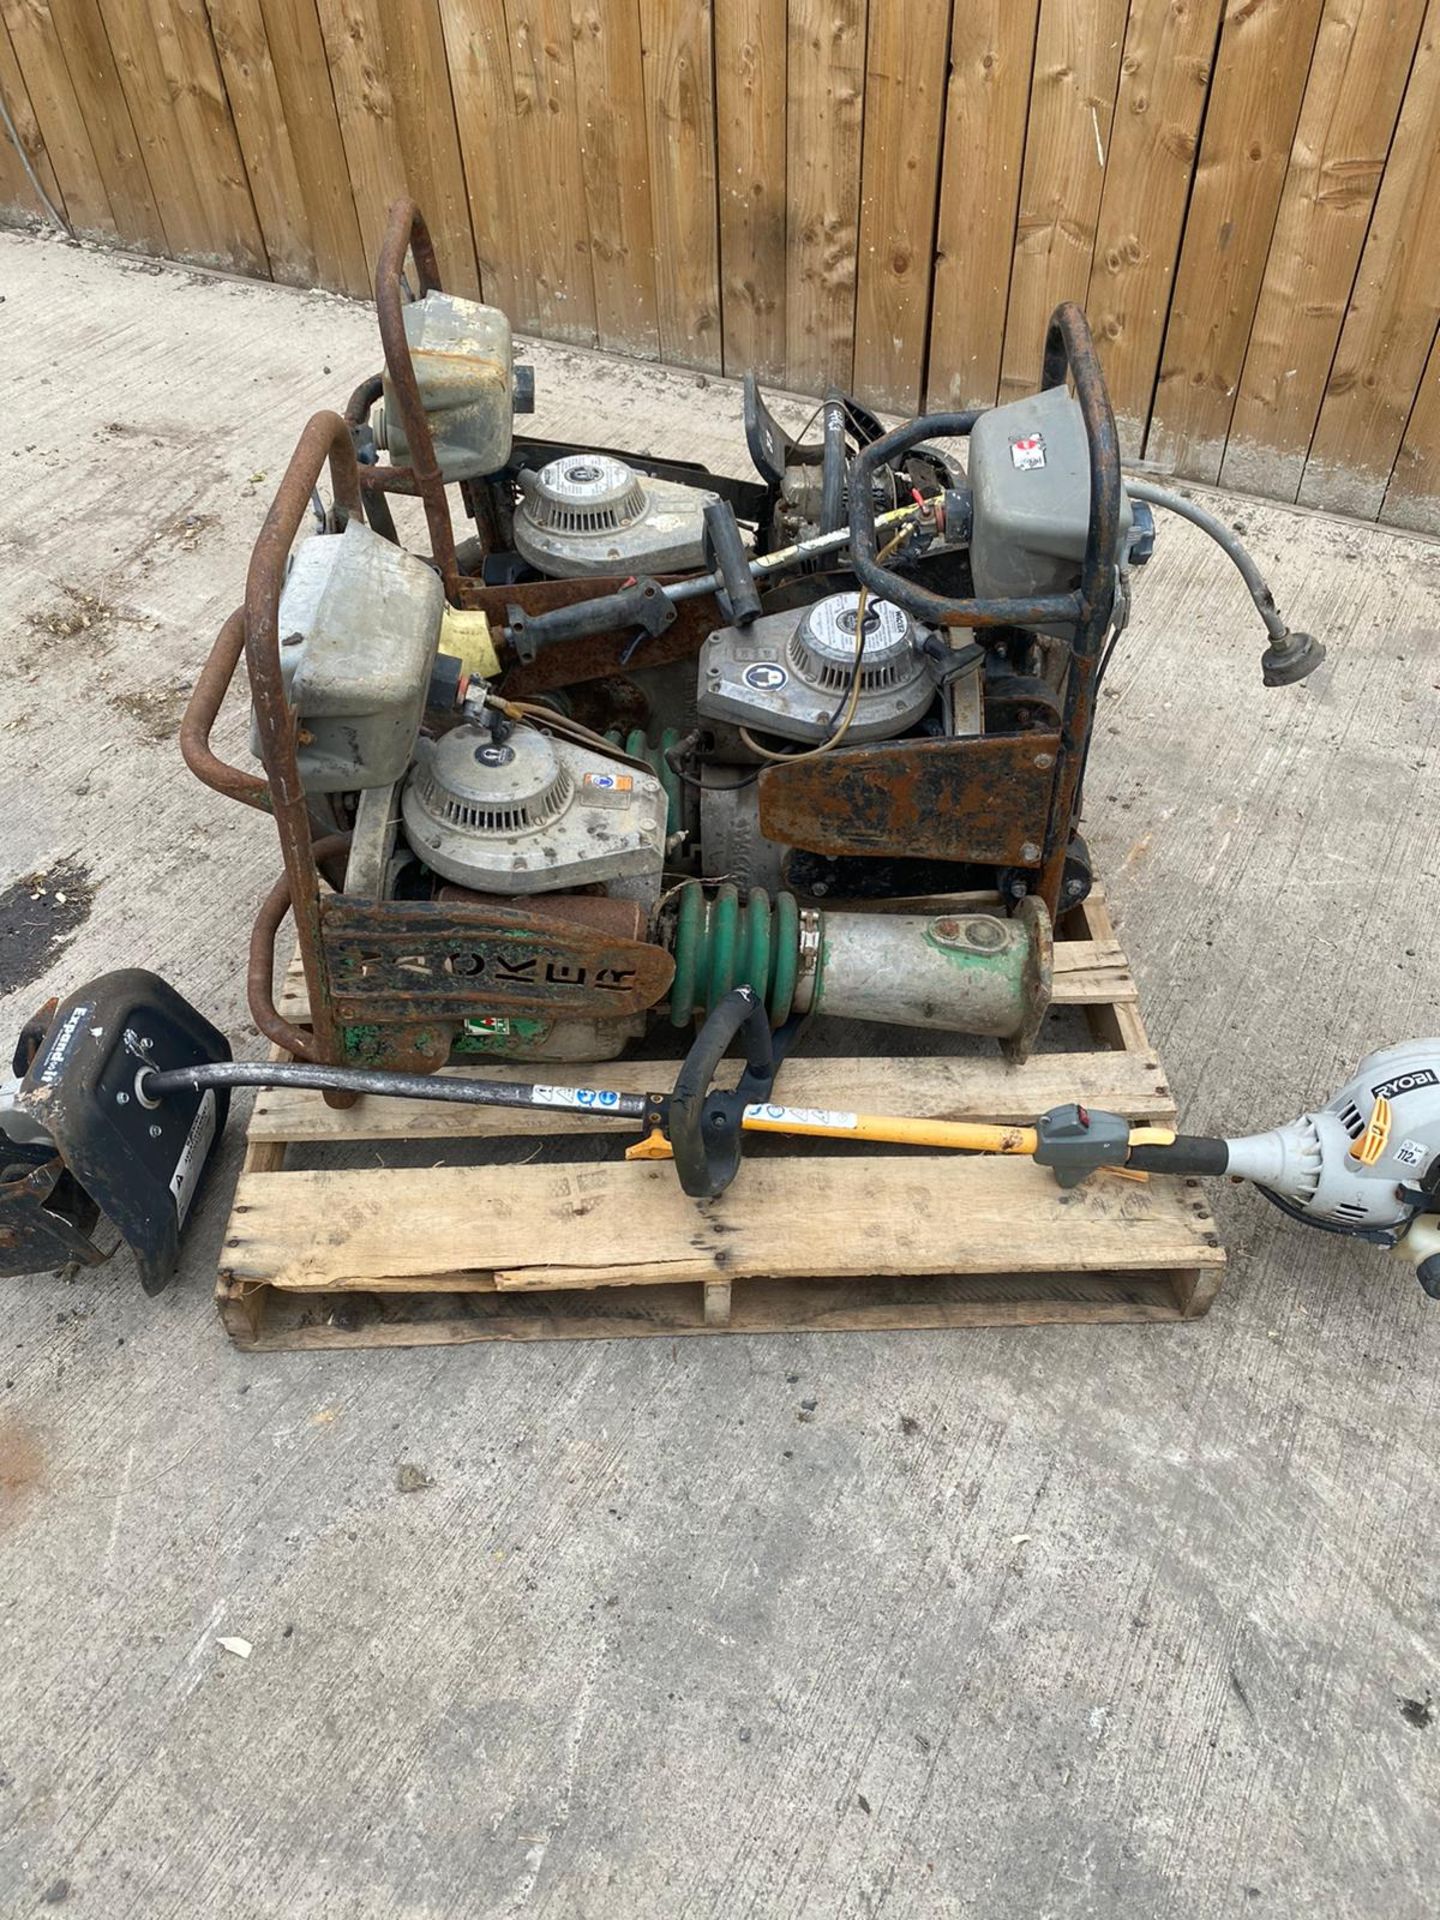 JOB LOT TOOLS, WACKER,BREAKERS,STRIMMER,ROTAVATOR, CHAINSAWS LOCATION: NORTH YORKSHIRE - Image 2 of 2